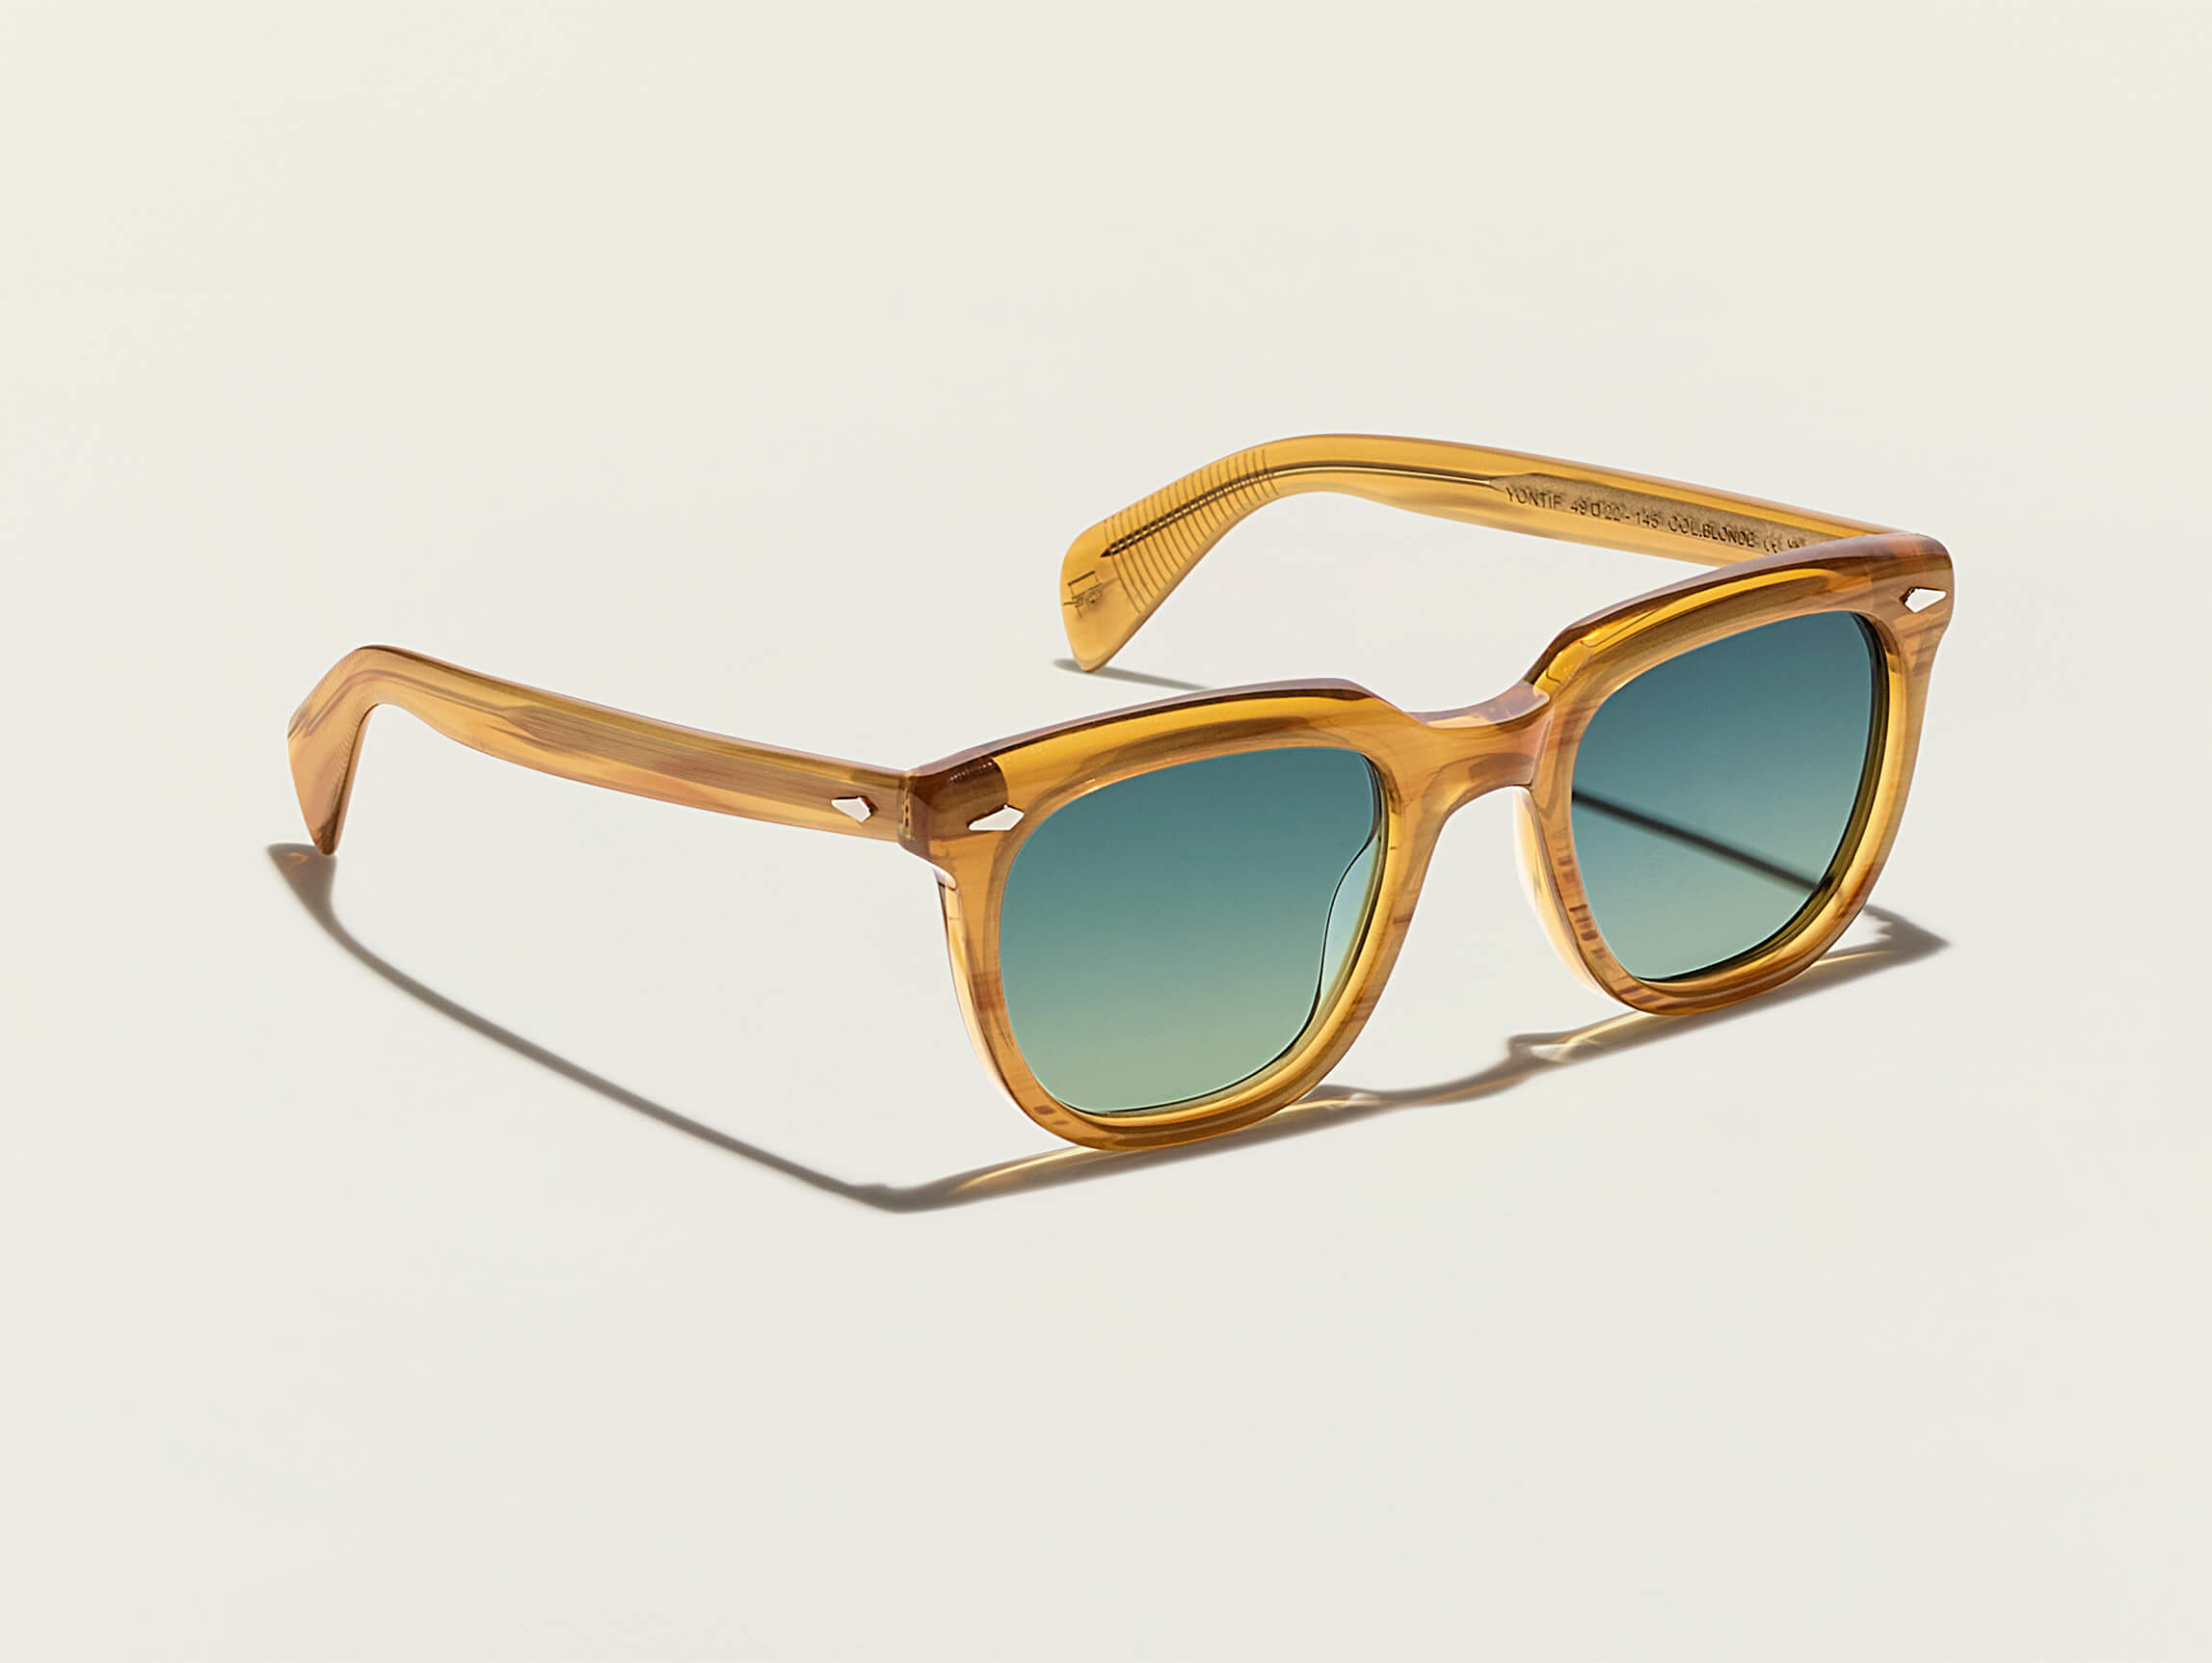 #color_blonde | The YONTIF SUN in Blonde with Forest Green Tinted Lenses